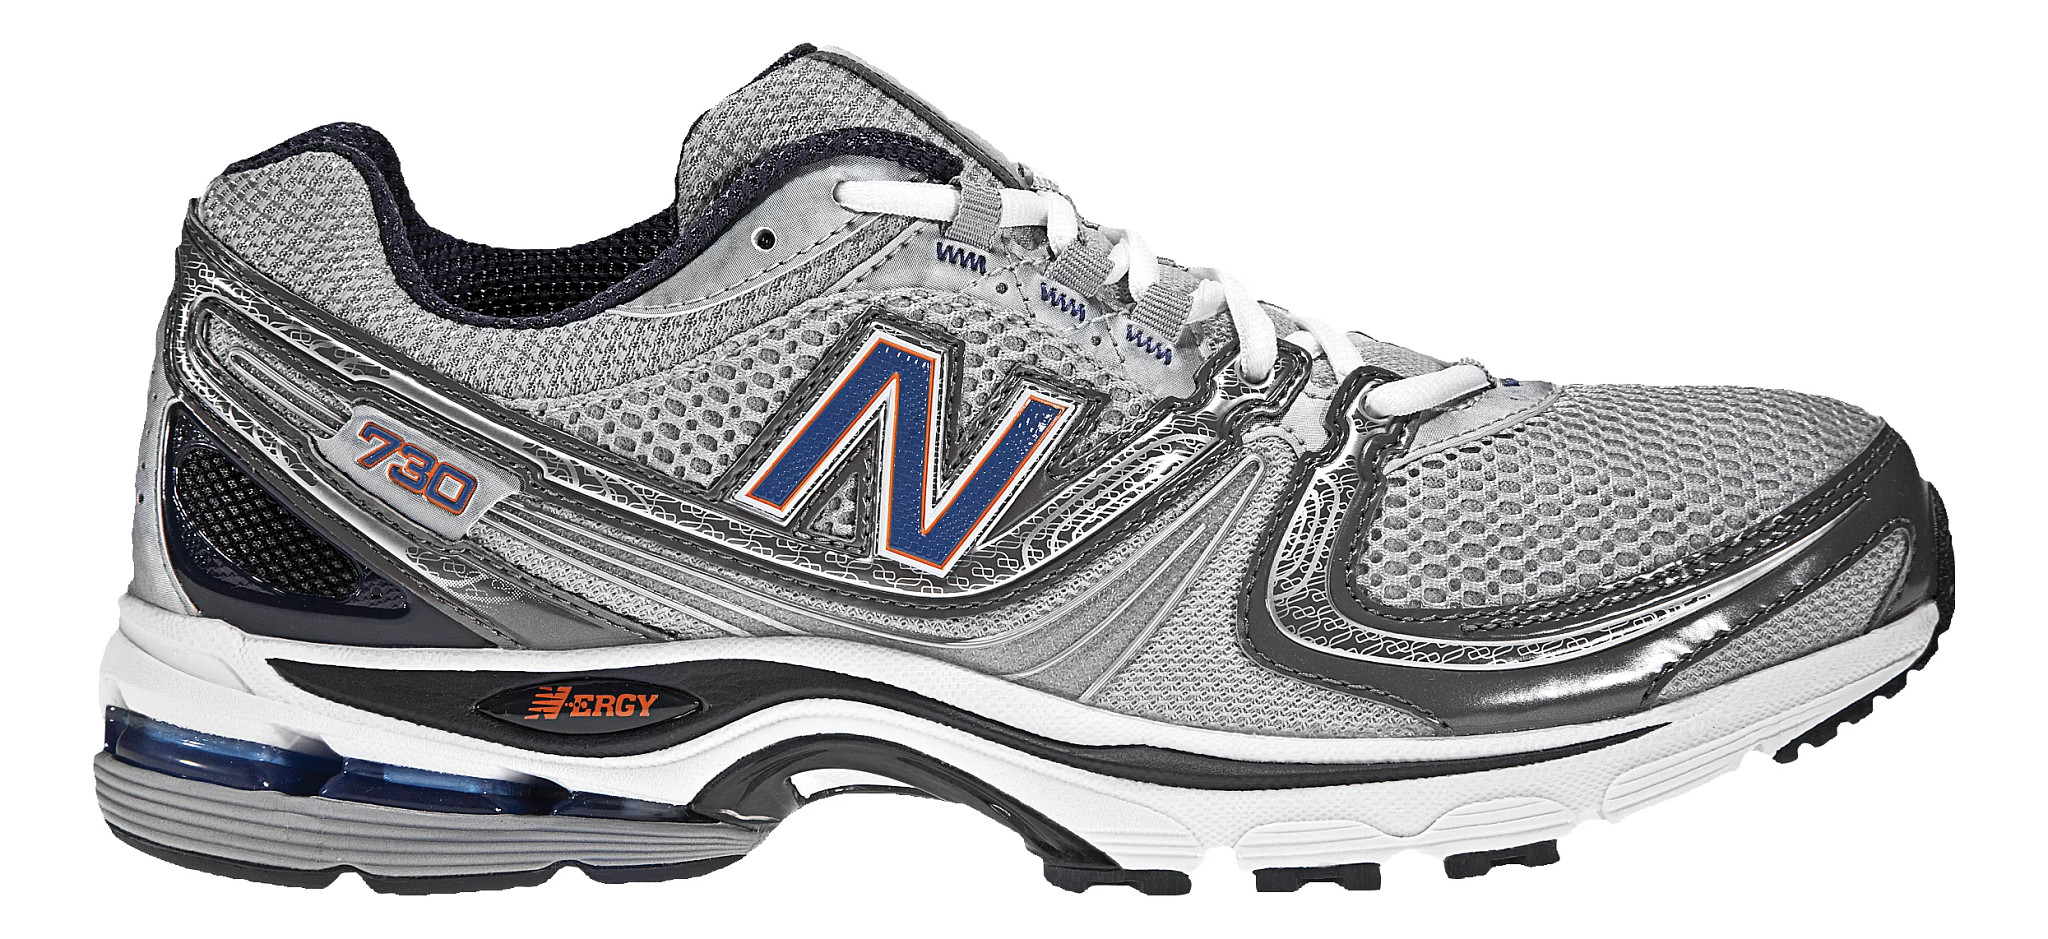 Confront Perceive stick Mens New Balance 730 Running Shoe